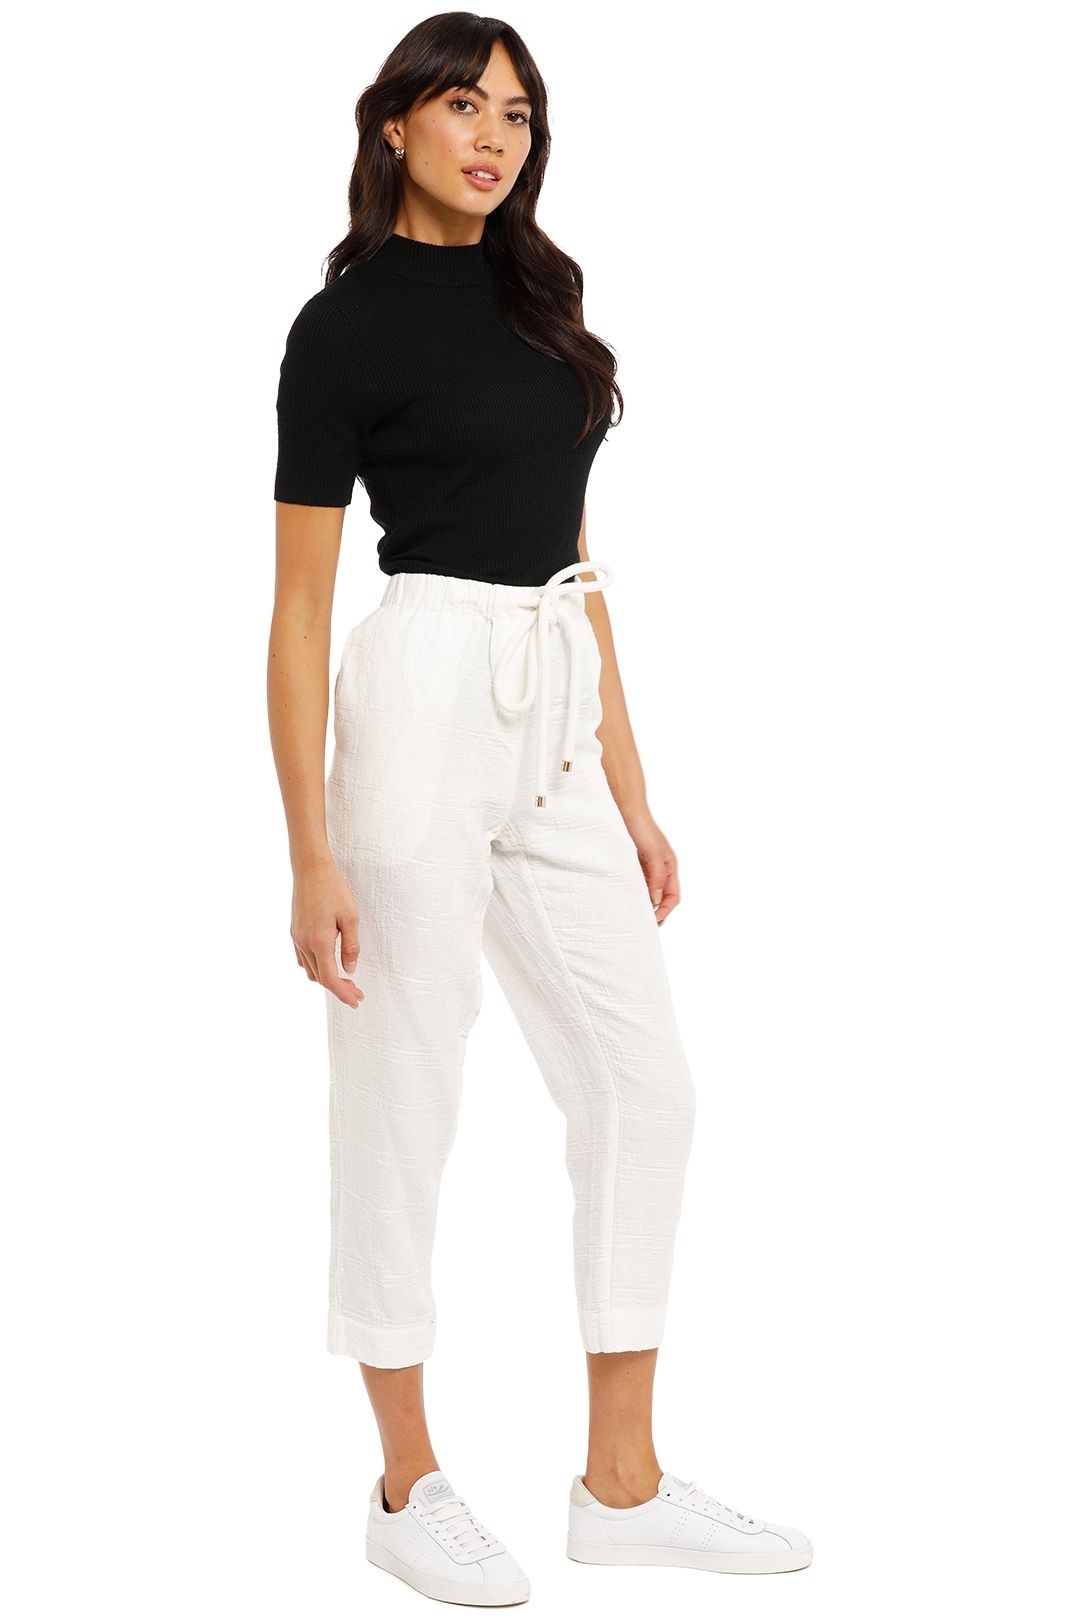 Acler Reece Pant White